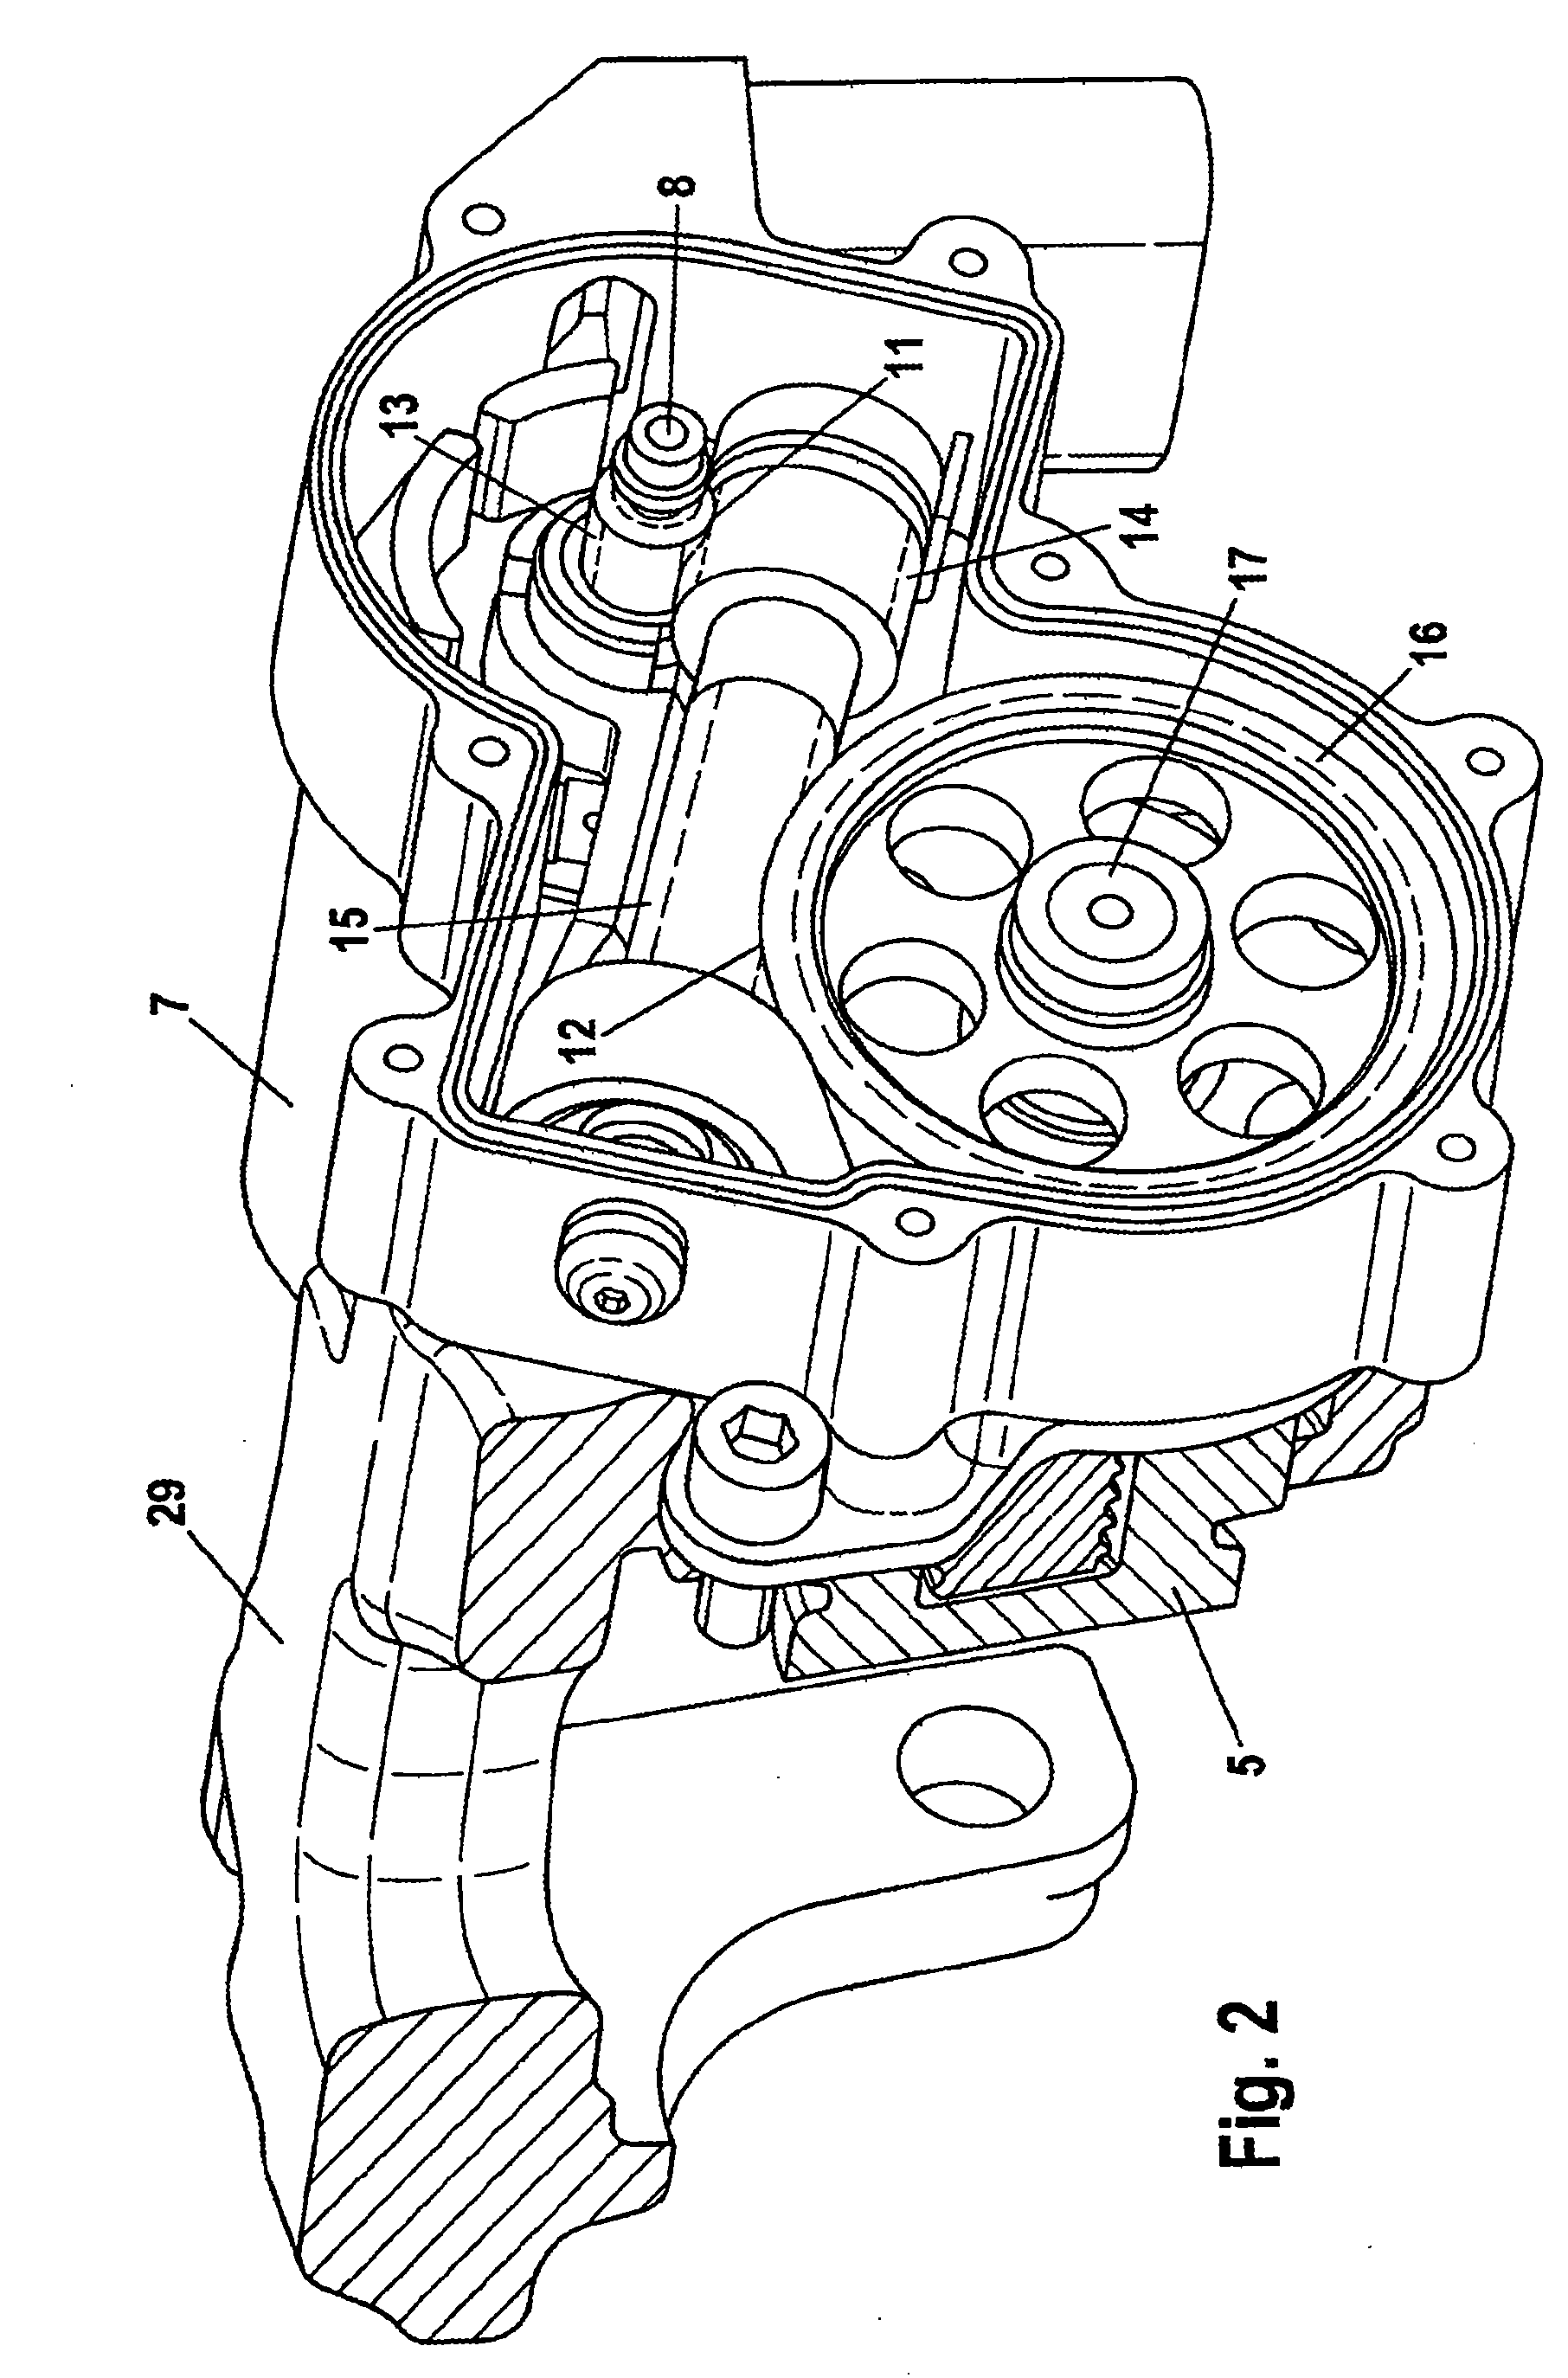 Combined Vehicle Brake With Electromechanically Operable Parking Brake and Gear For Converting A Rotary Movement Into A Translational Movement